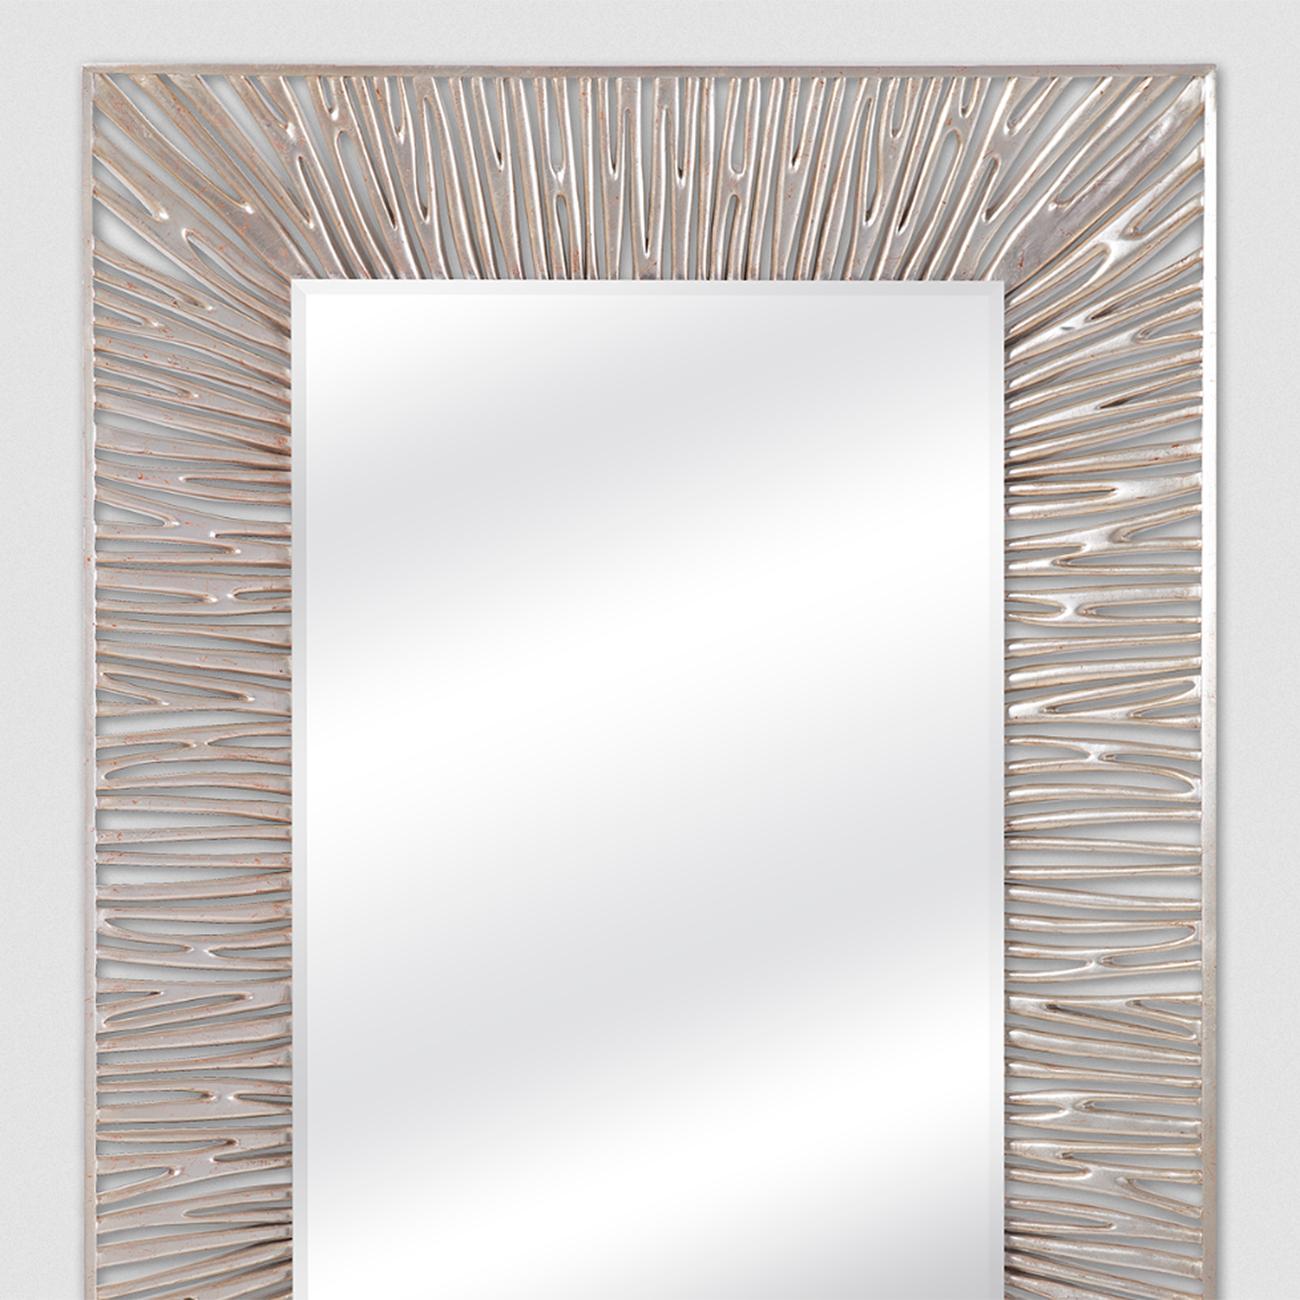 Mirror Twiggy Recta with frame in solid wood, hand carved frame
in antique silver leaf finish. With beveled mirror glass.
Also available in black satinated finish or antique gold leaf finish
or silver leaf finish or gold leaf finish.
Available